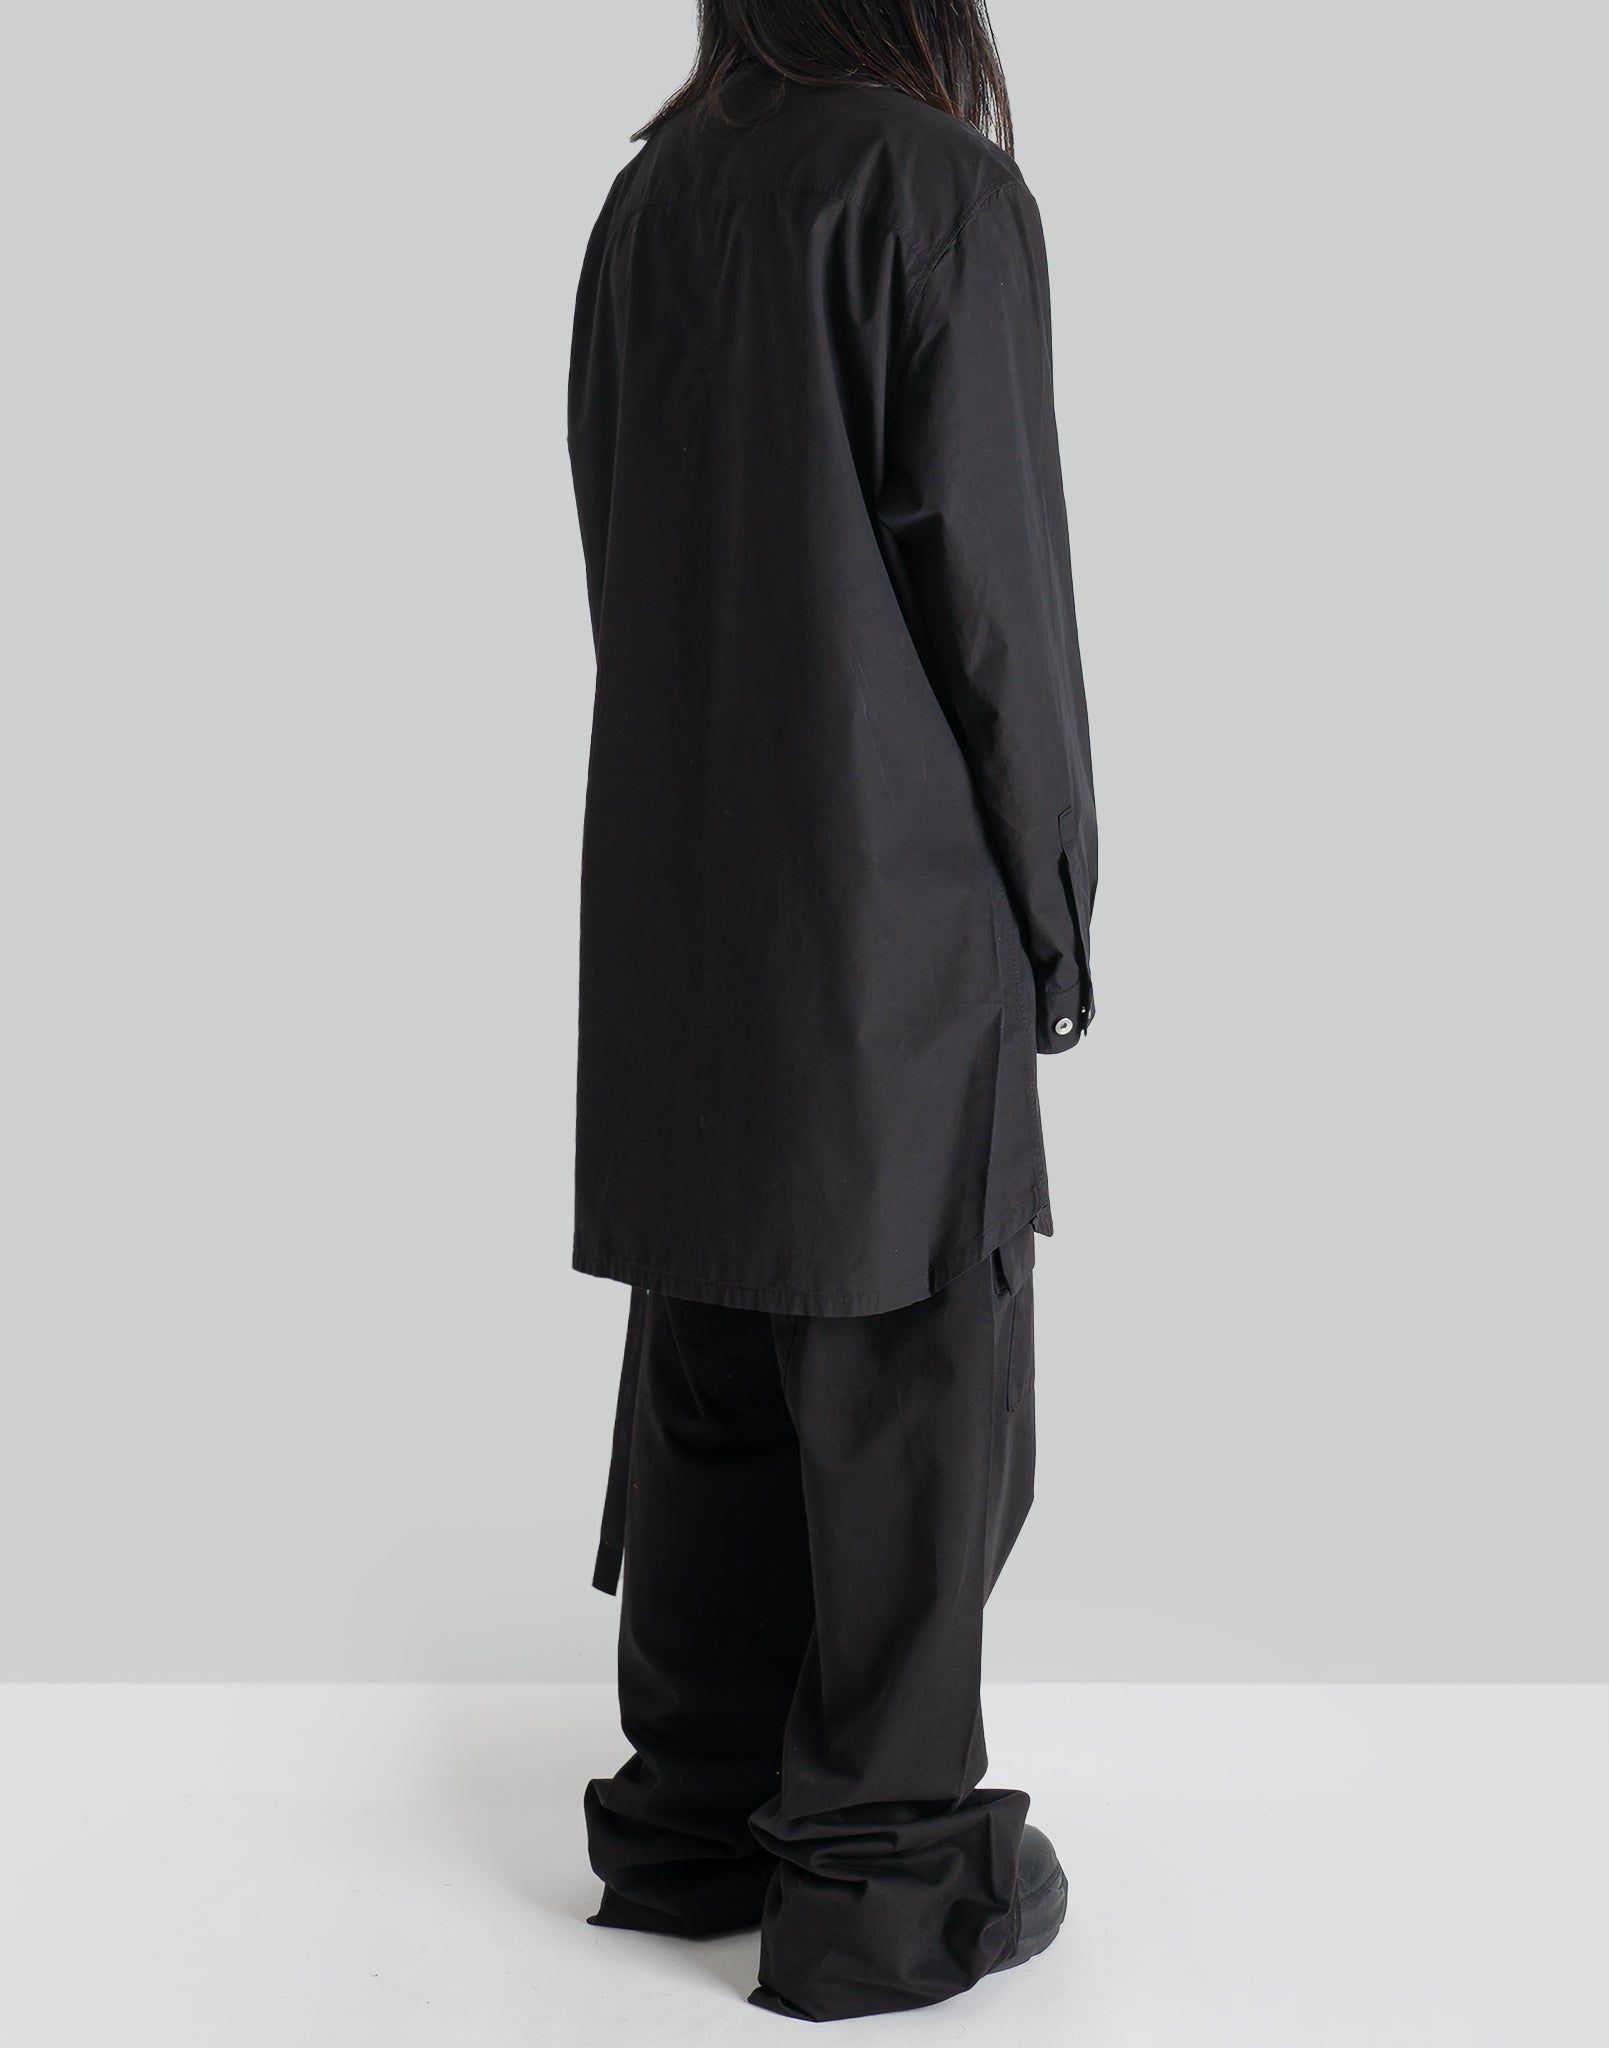 rick owens oversized outershirt測ったところ約62cmでした